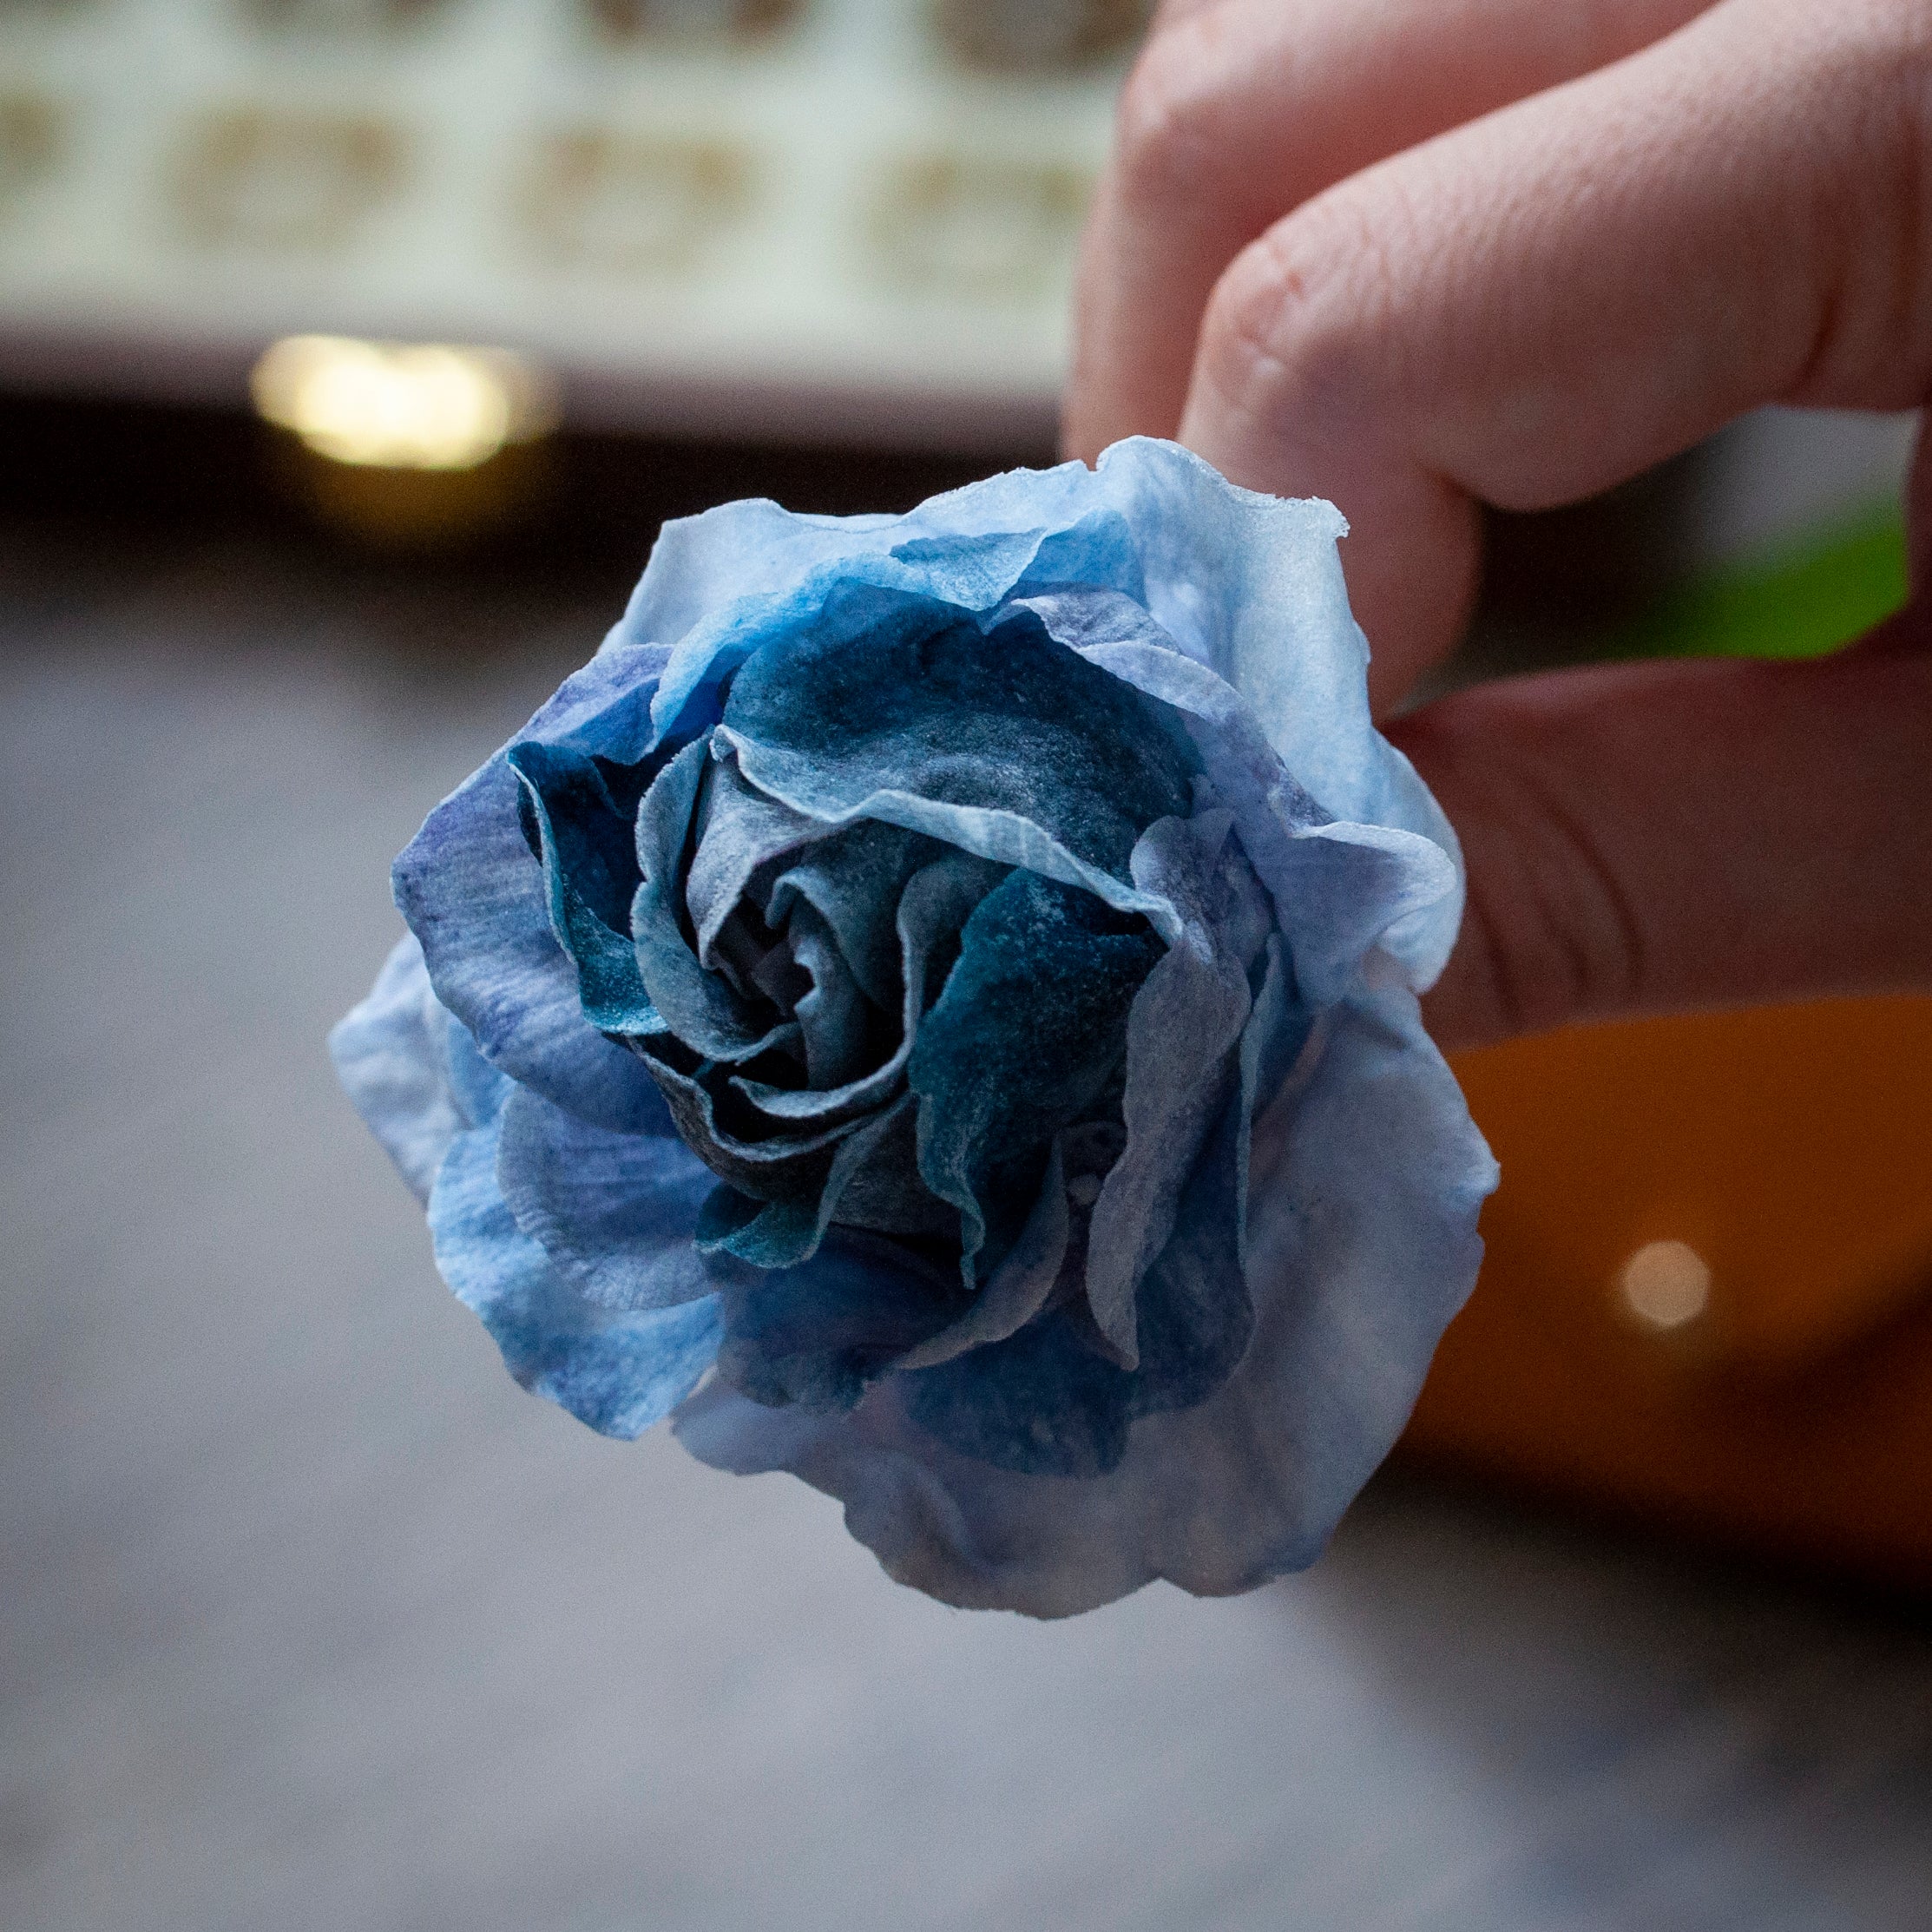 Leather Craft and Wafer Paper Flower Art - Crafune x Natalie (15th Aug, 11.15 am) - Crafune